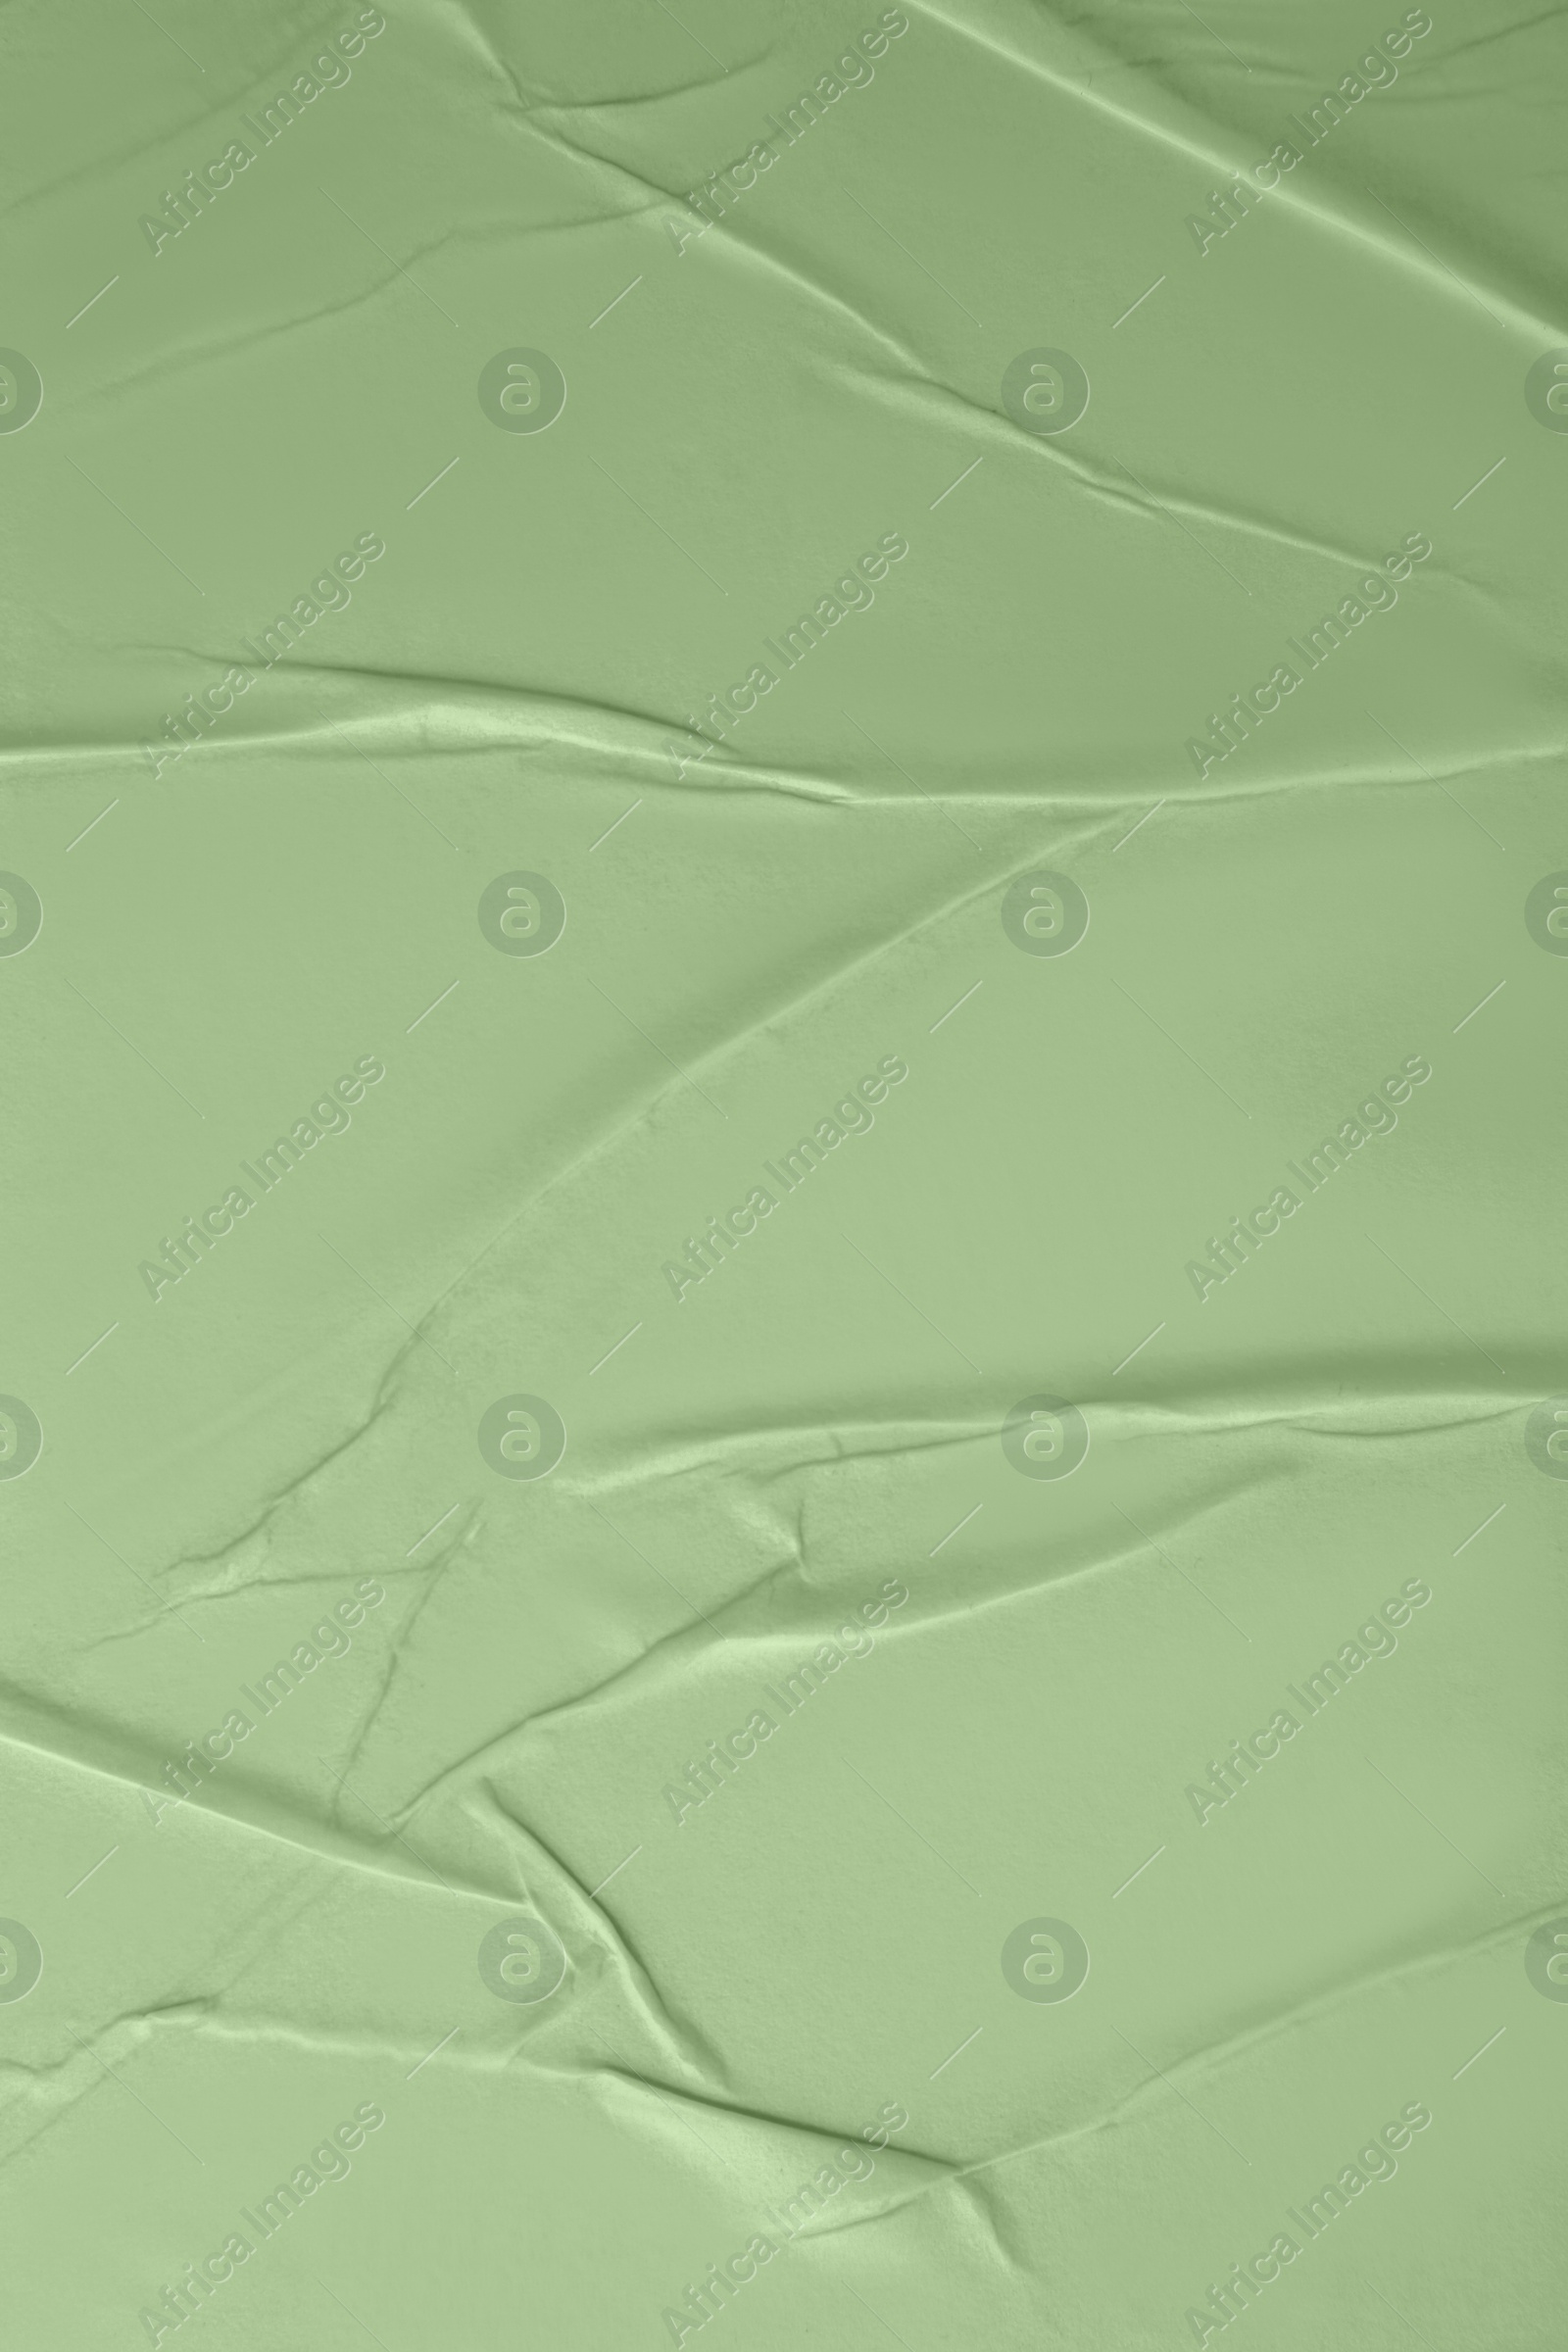 Image of Creased sage green paper as background, closeup